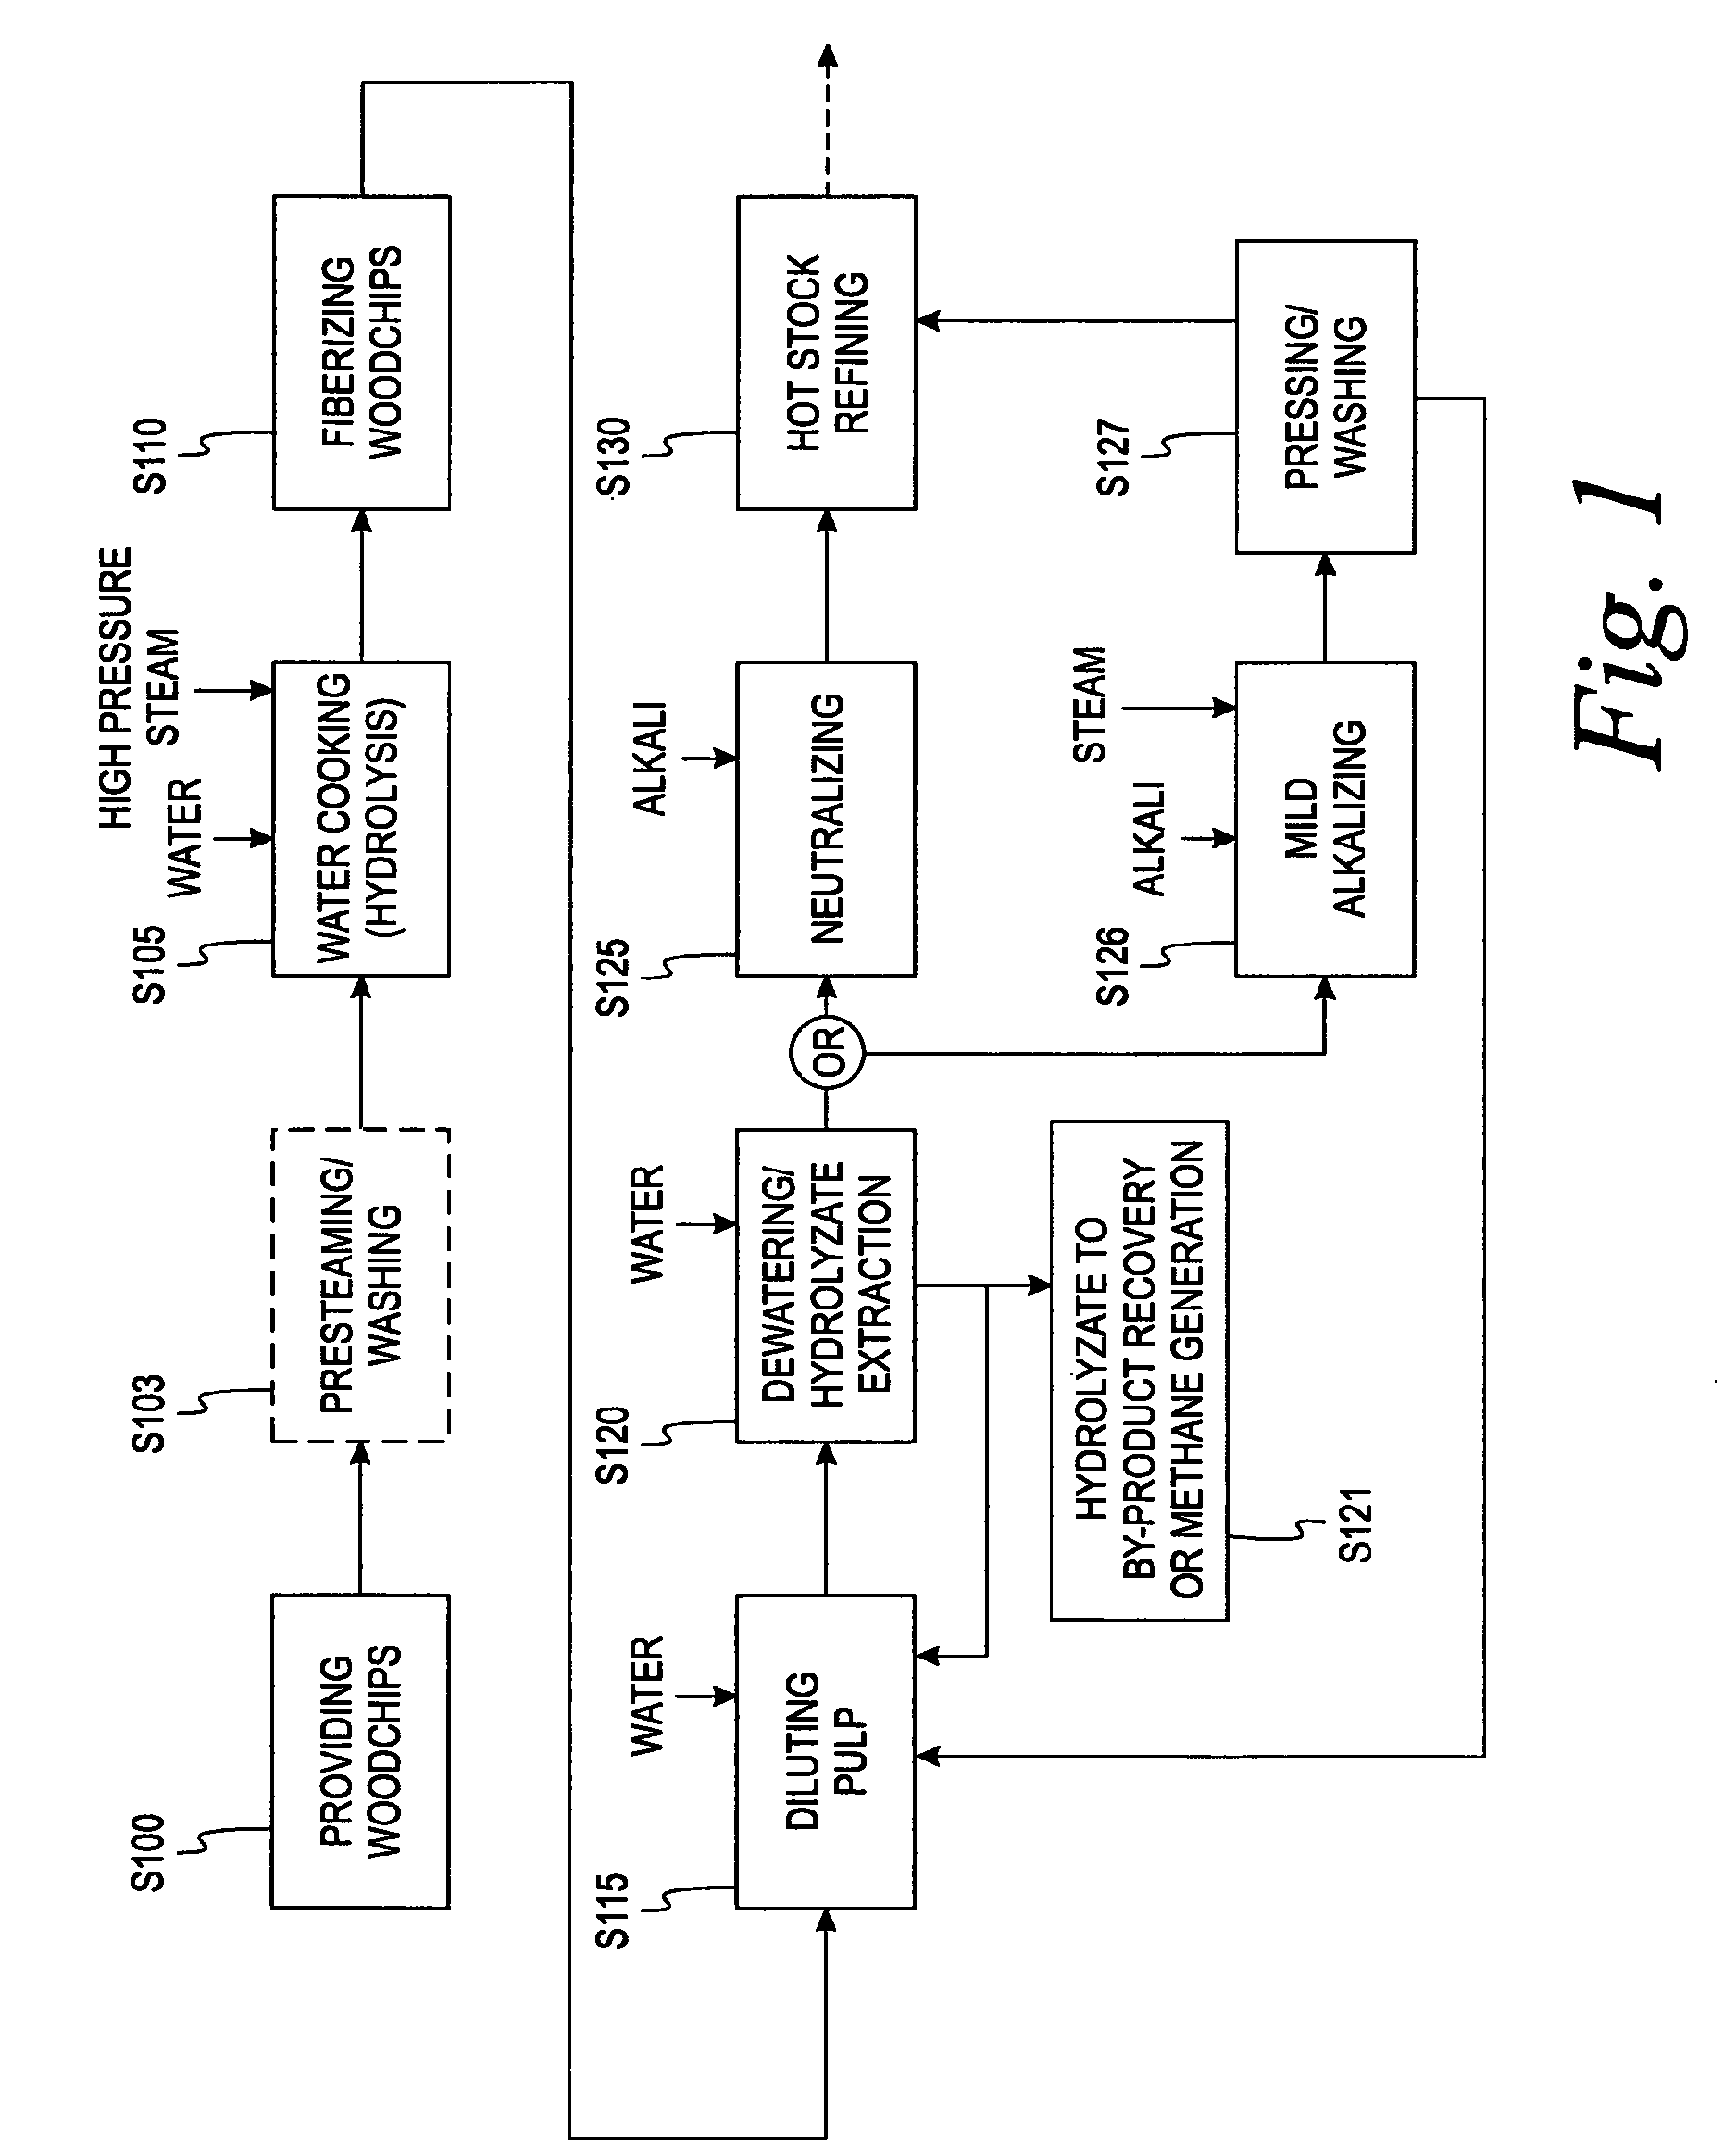 Method of pre-treating woodchips prior to mechanical pulping